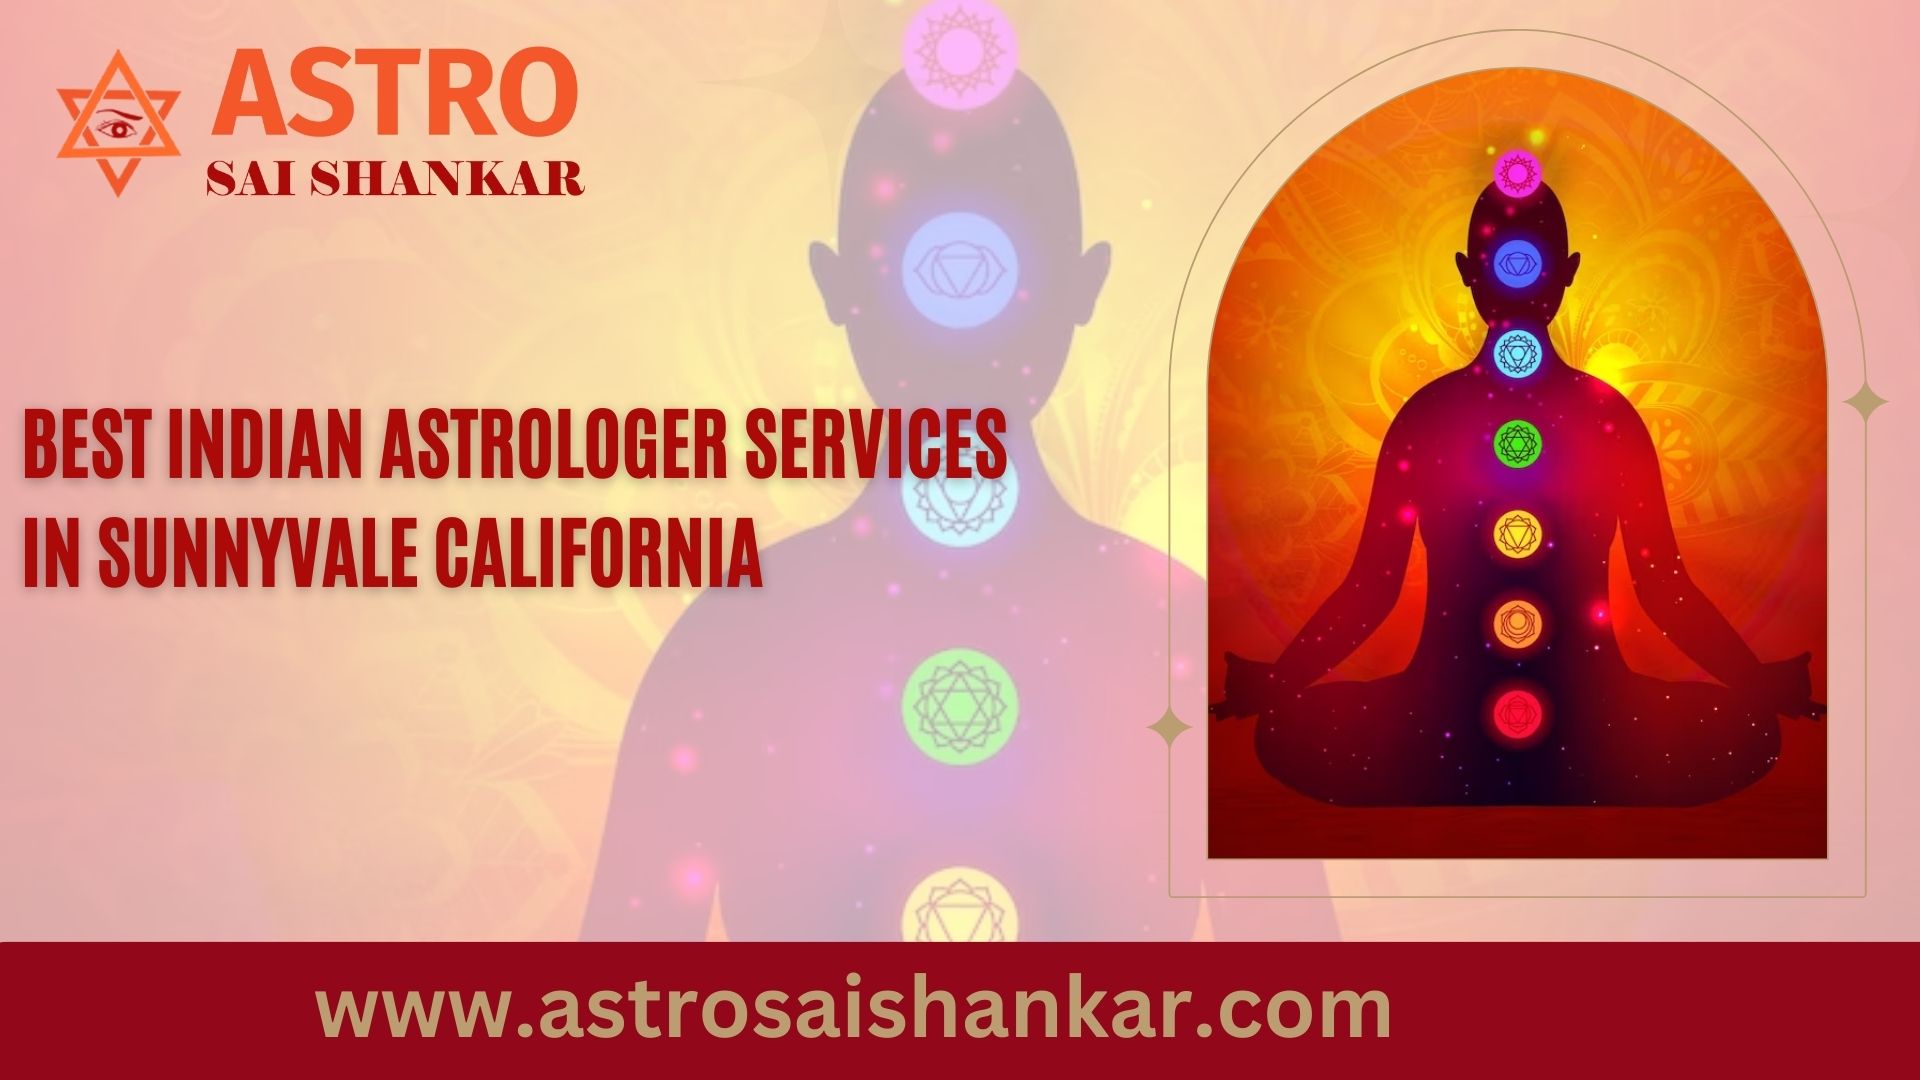 Best Indian Astrologer Services in Sunnyvale California